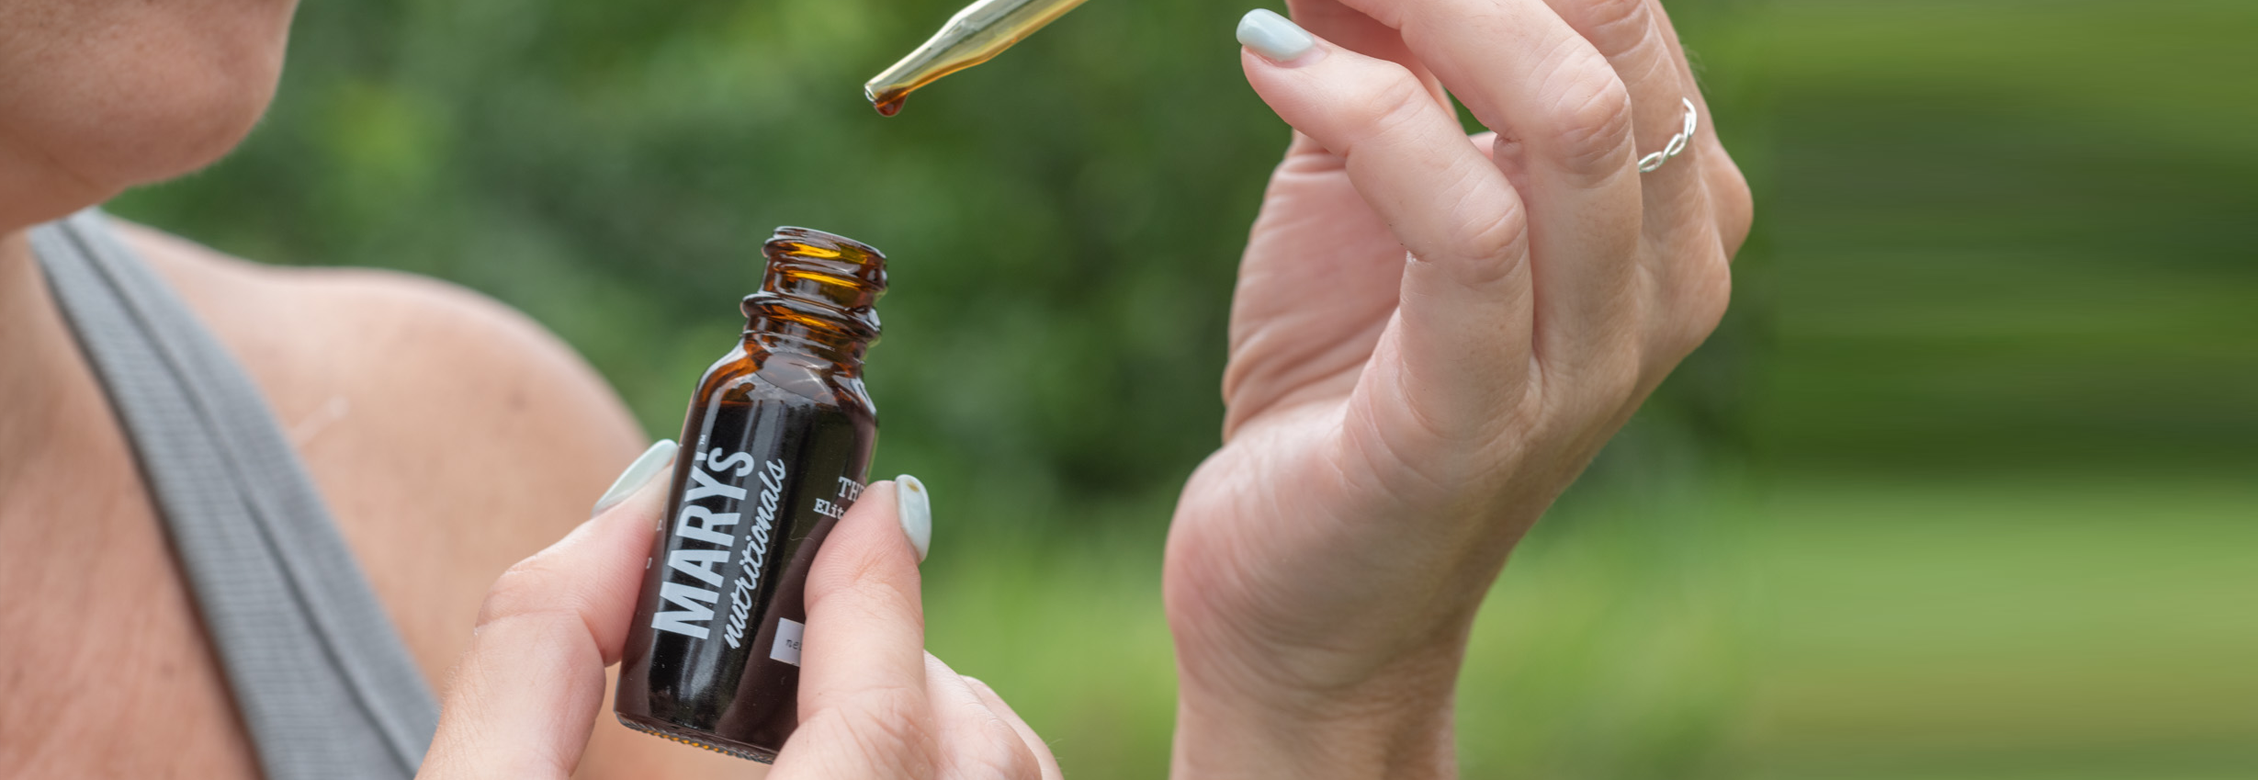 Buy CBD Oil From Industry-Leading CBD Product Brand